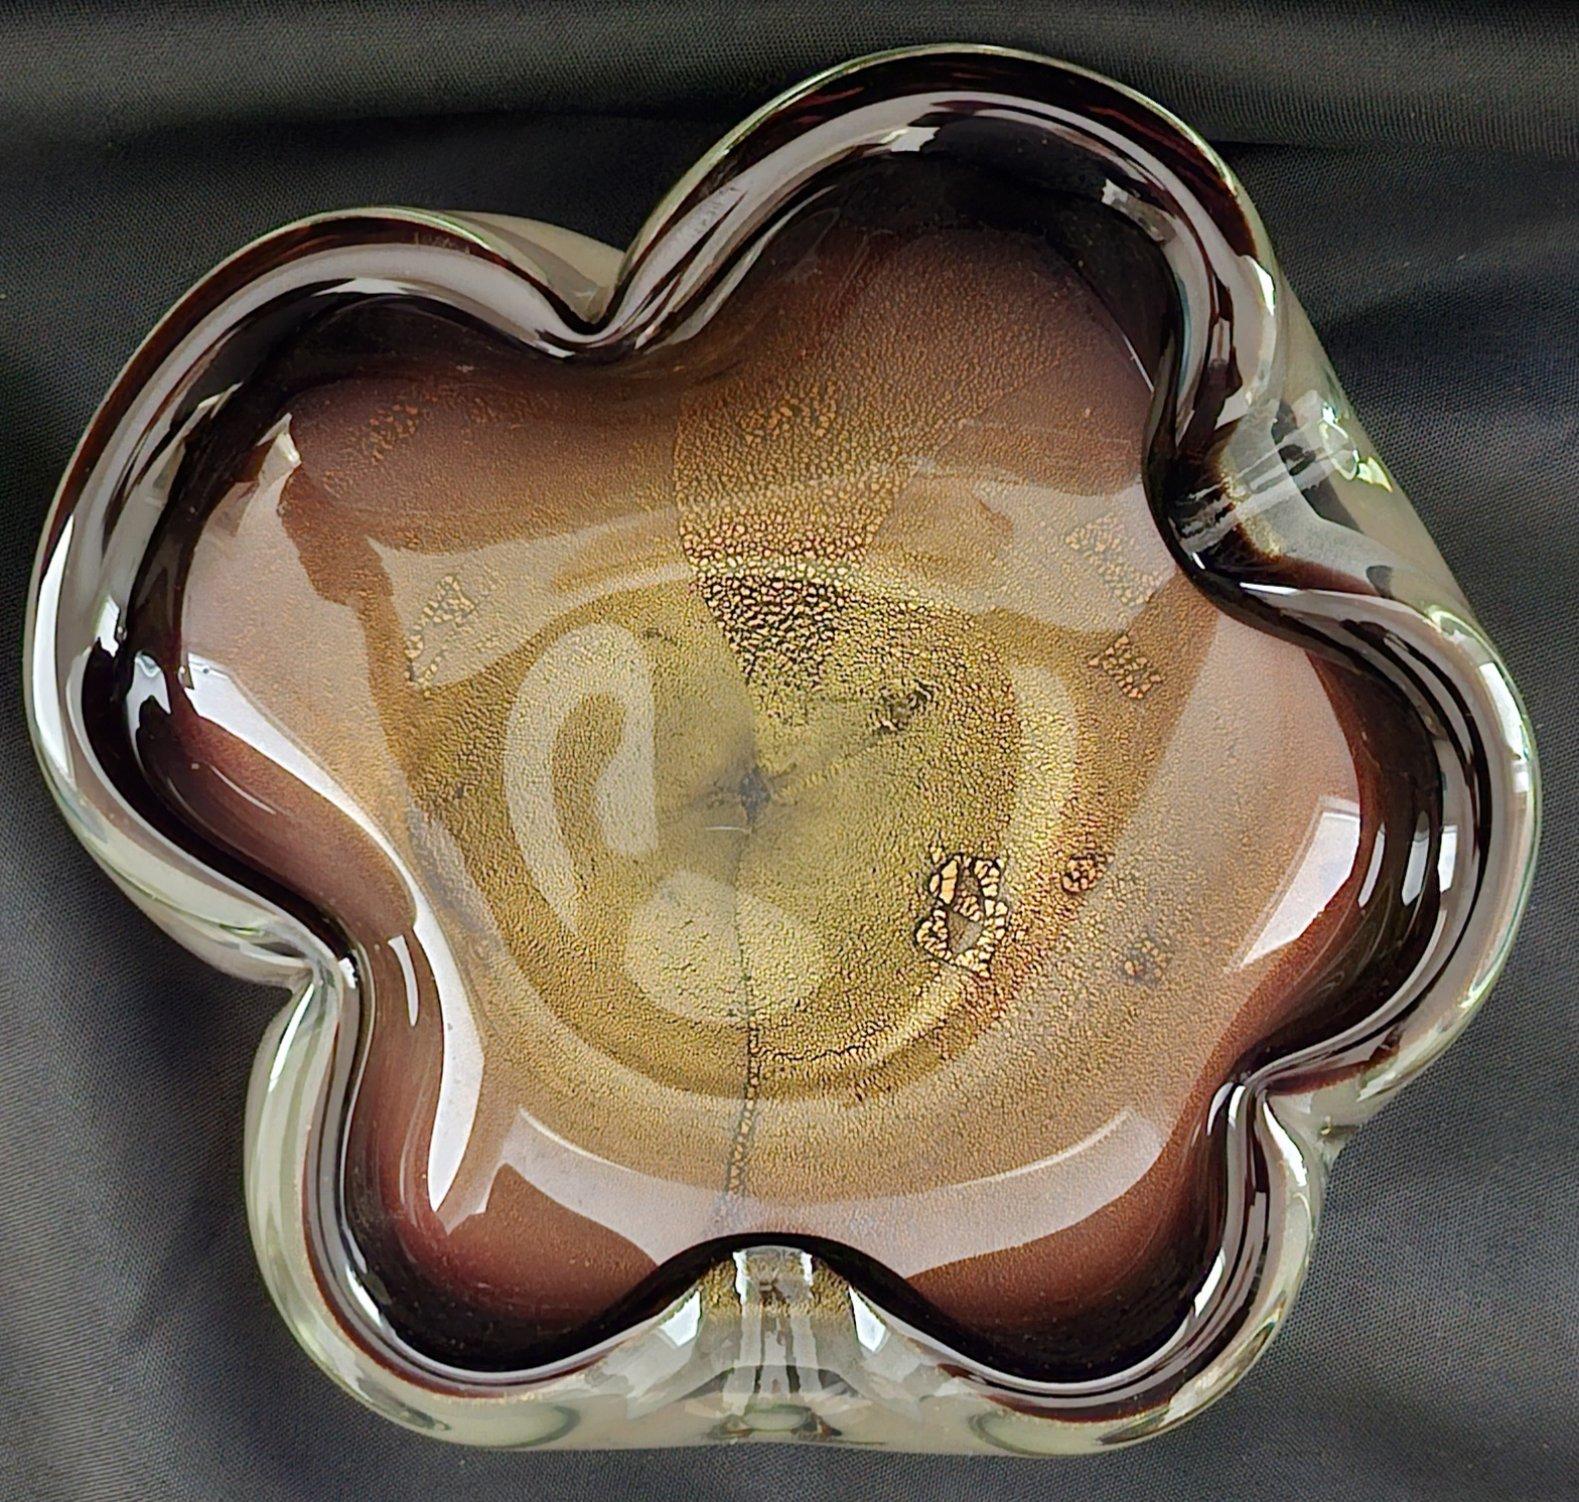 Murano Glass Sommerso Dish/Ashtray/Bowl w/Gold Polveri, Seguso/Barbini suspected
Measures about 7.5 x 7 x 1.75 inches.
This is a gorgeous piece which we feel may well be a Seguso or Barbini piece.
The colors are stunning as is the shape. 
On a light